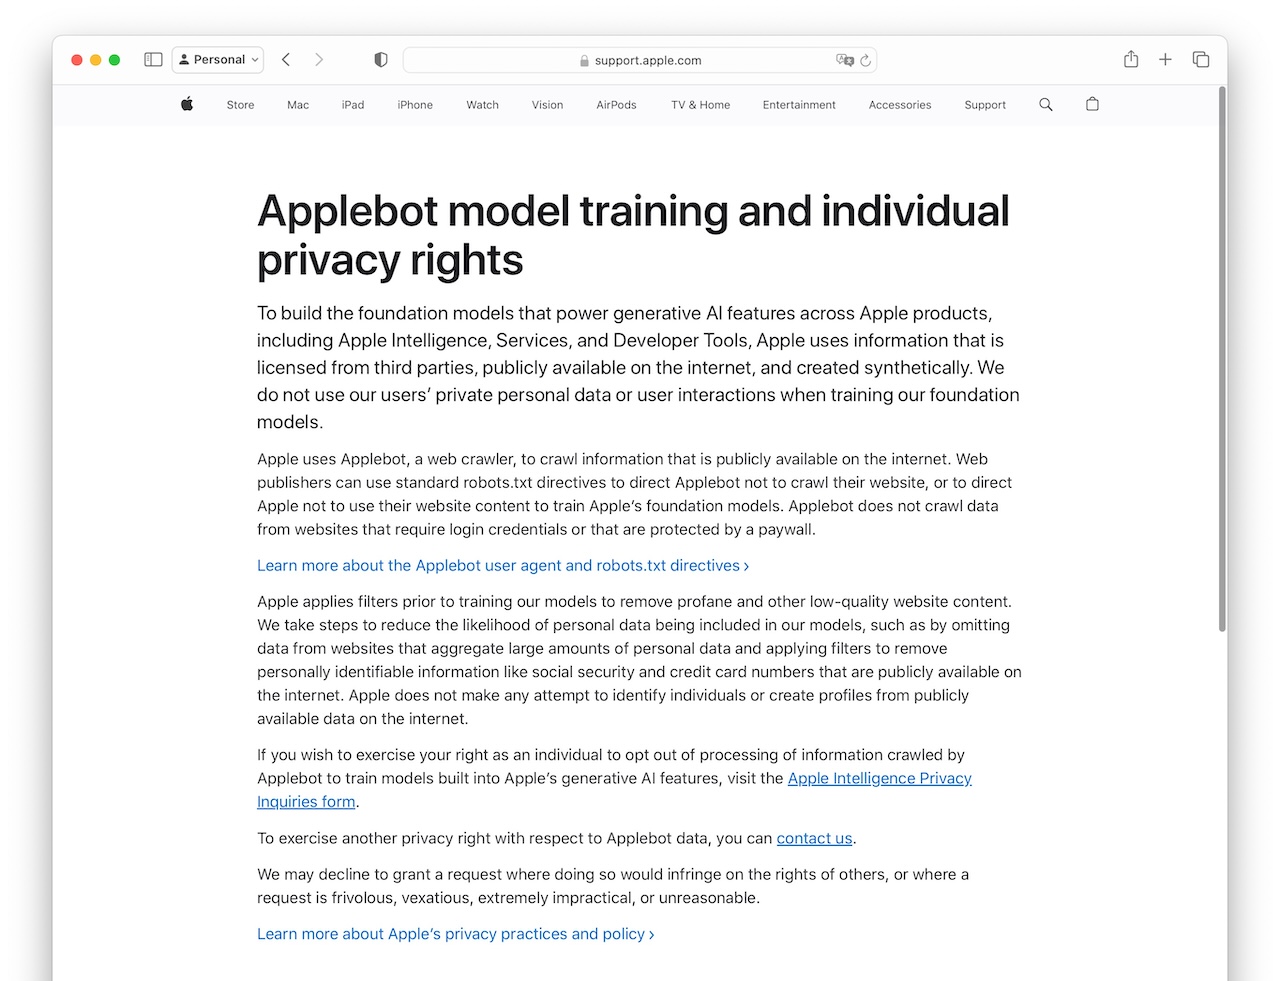 Applebot model training and individual privacy rights